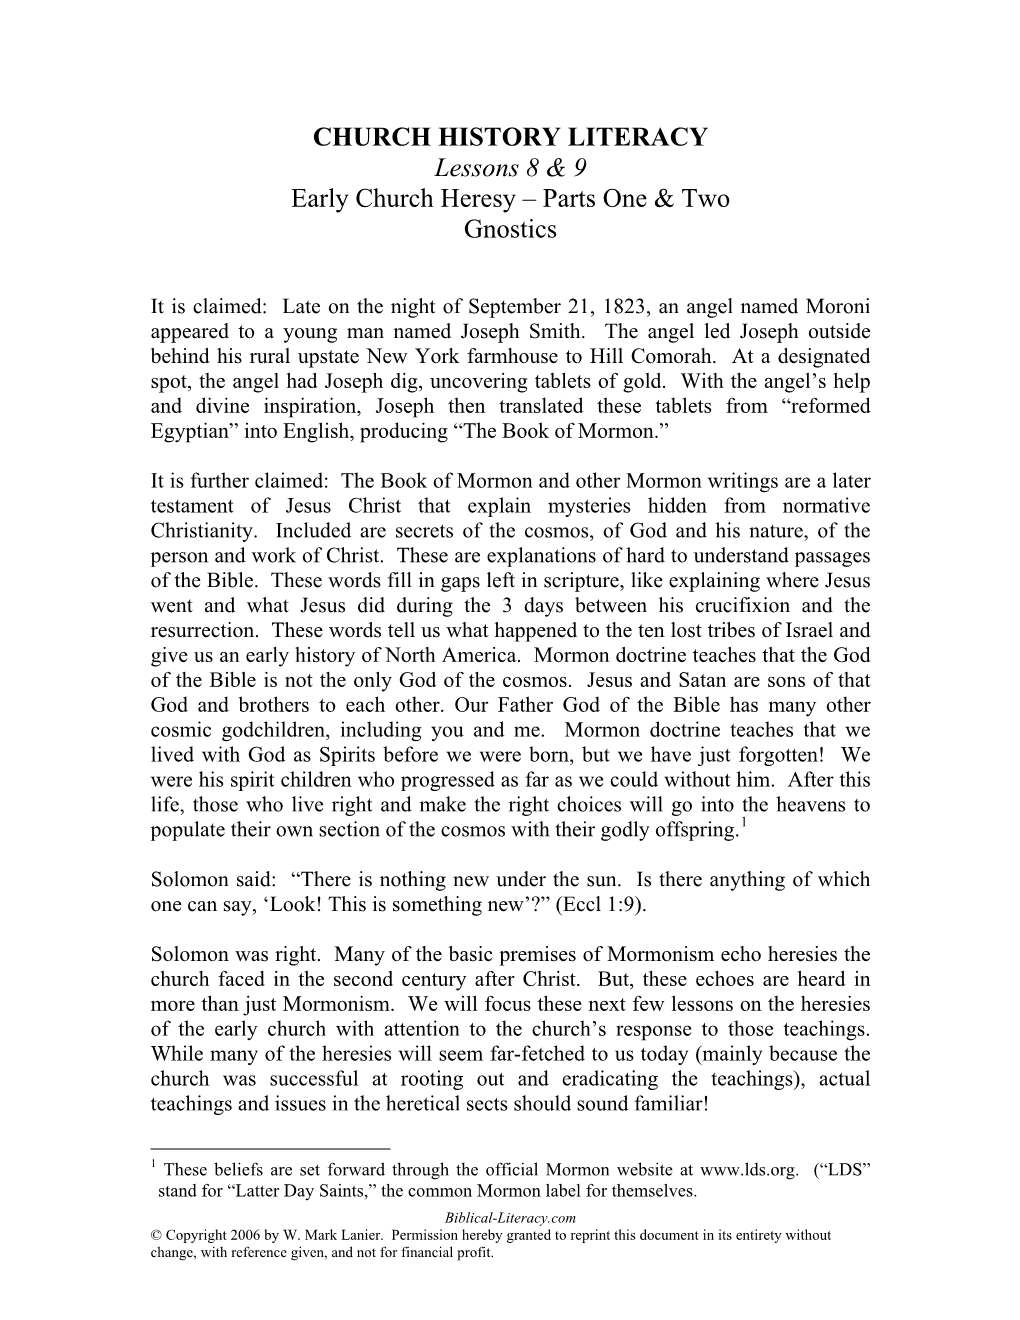 CHURCH HISTORY LITERACY Lessons 8 & 9 Early Church Heresy – Parts One & Two Gnostics